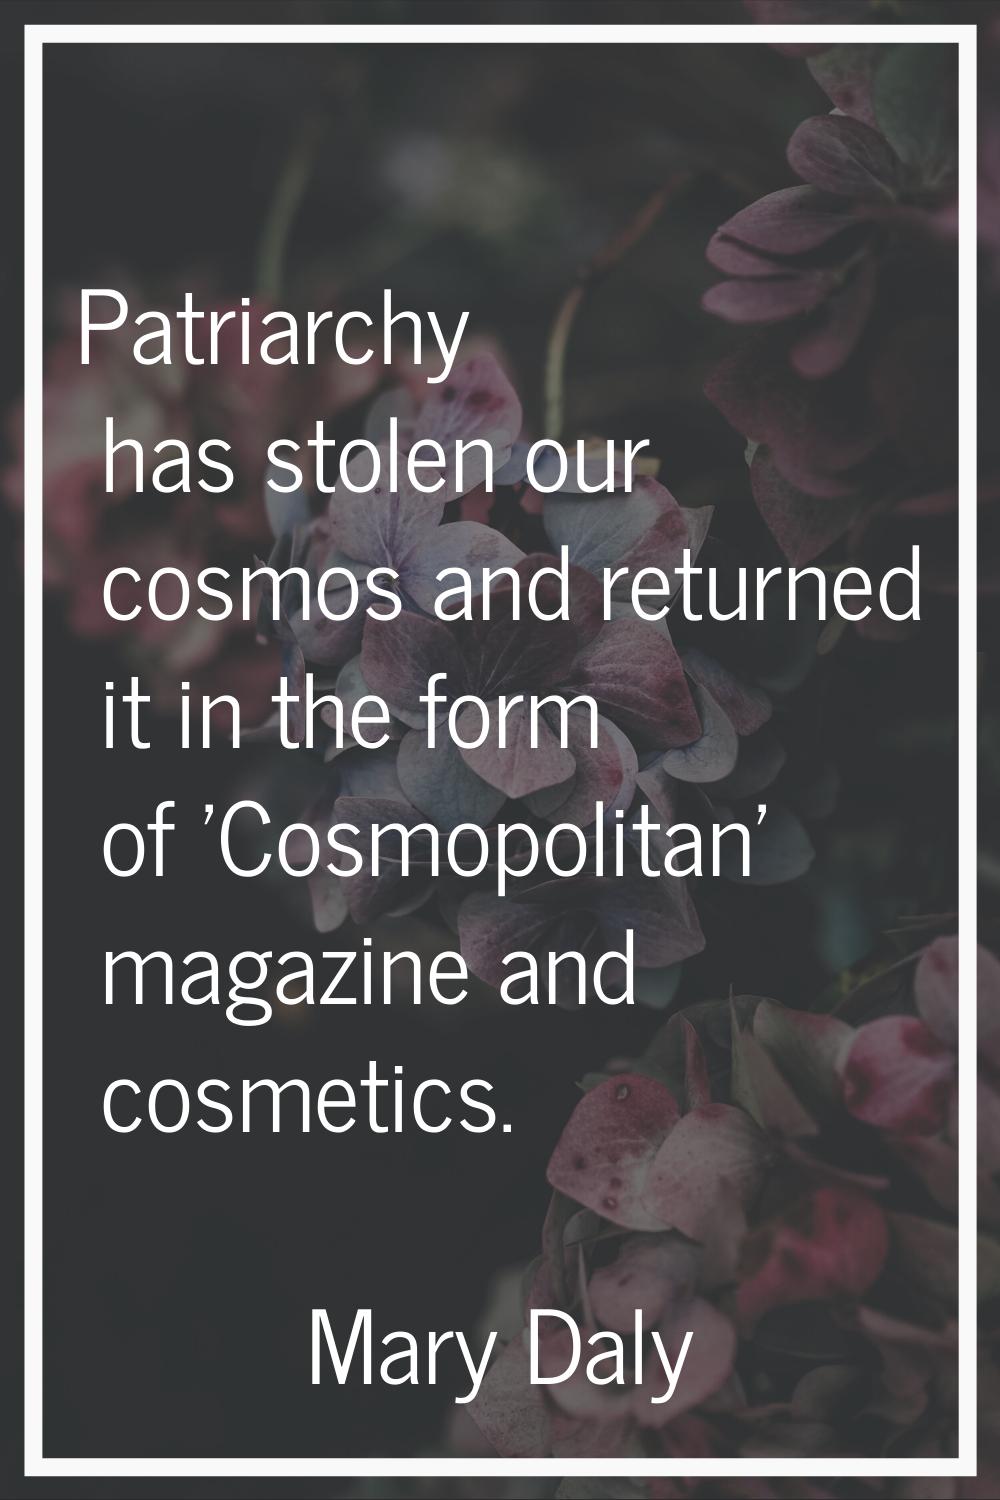 Patriarchy has stolen our cosmos and returned it in the form of 'Cosmopolitan' magazine and cosmeti